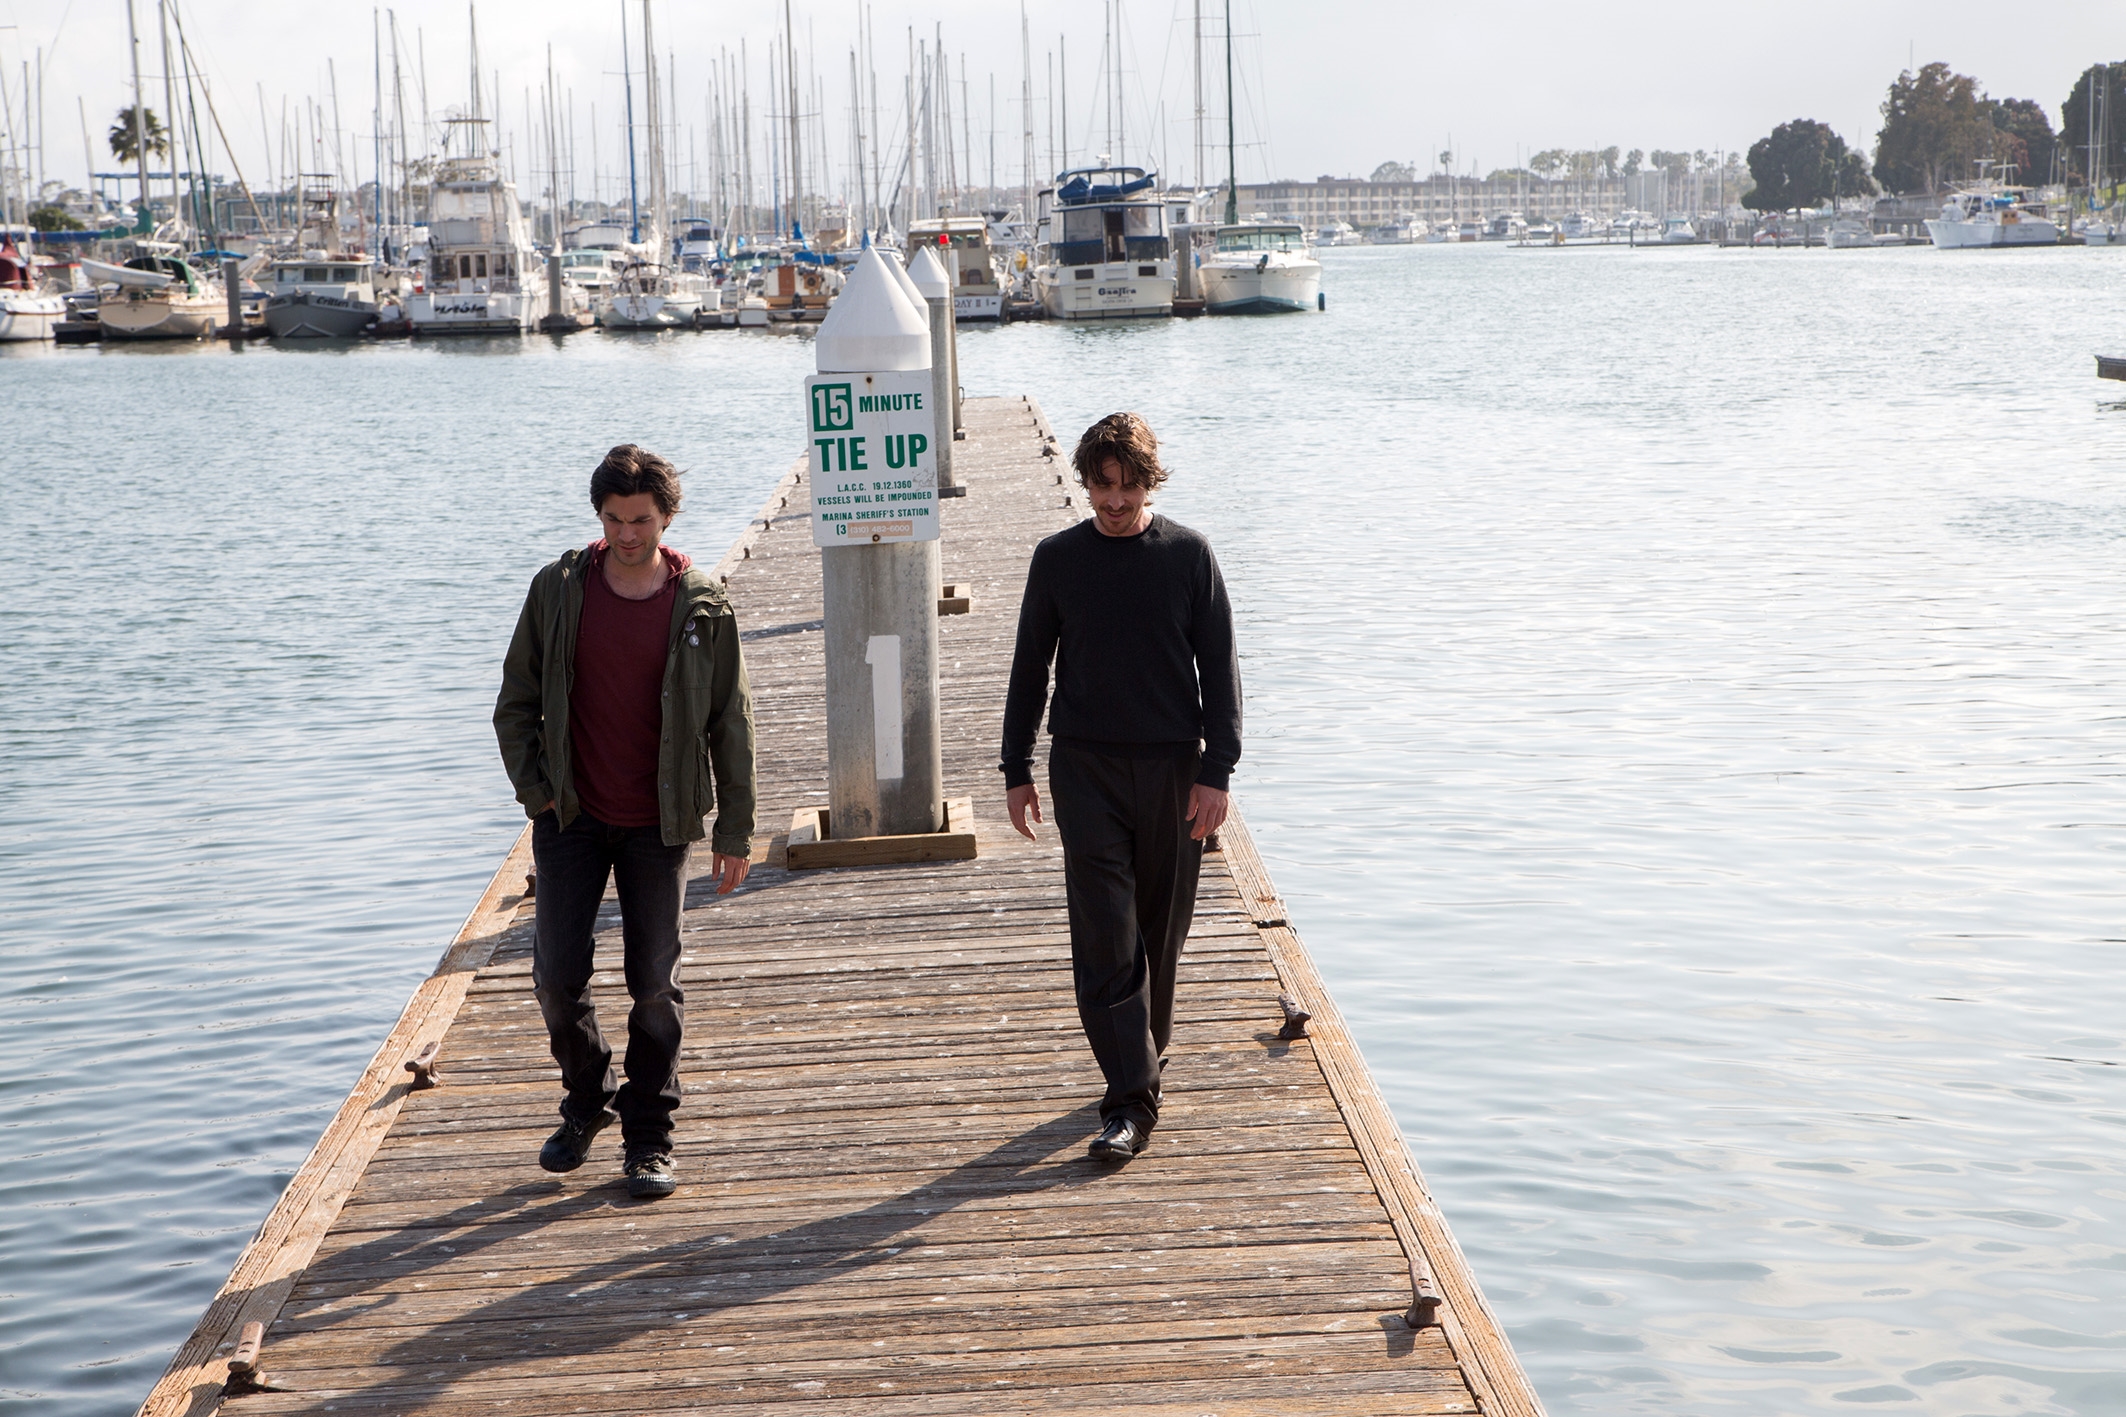 Image du film Knight of Cups beedfcc2-27d0-43eb-be43-8cae58f01890